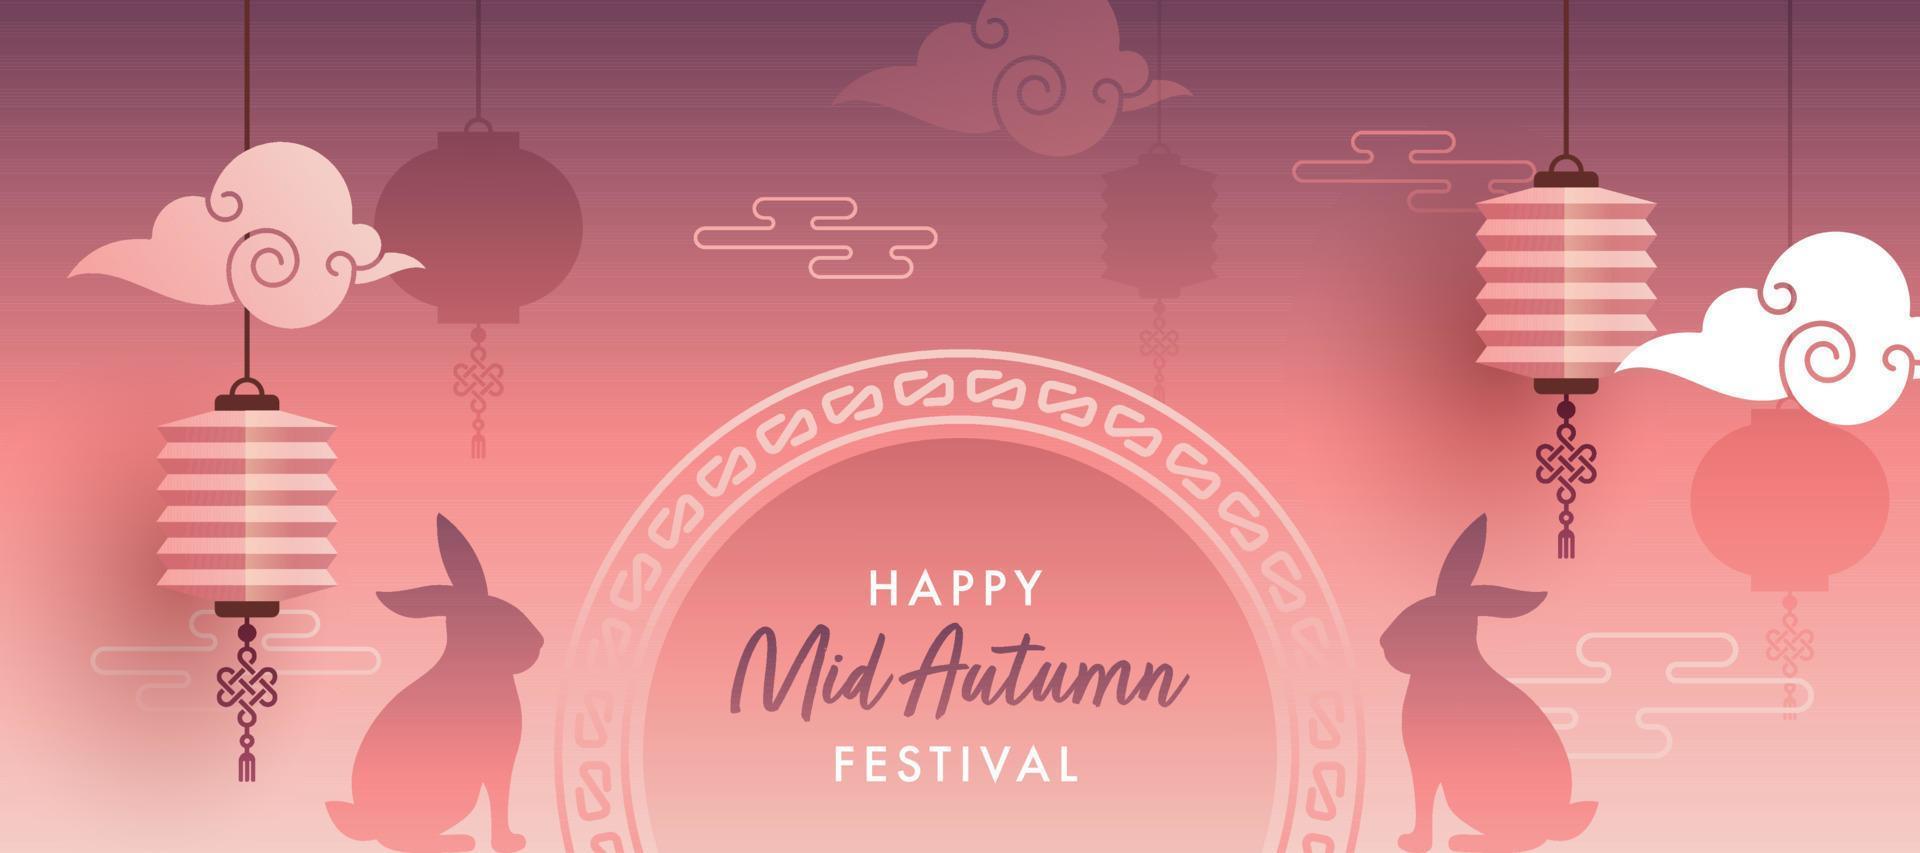 Happy Mid Autumn Festival Header or Banner Design with Silhouette Bunnies, Clouds and Hanging Chinese Lanterns on Gradient Light Red and Purple Background. vector